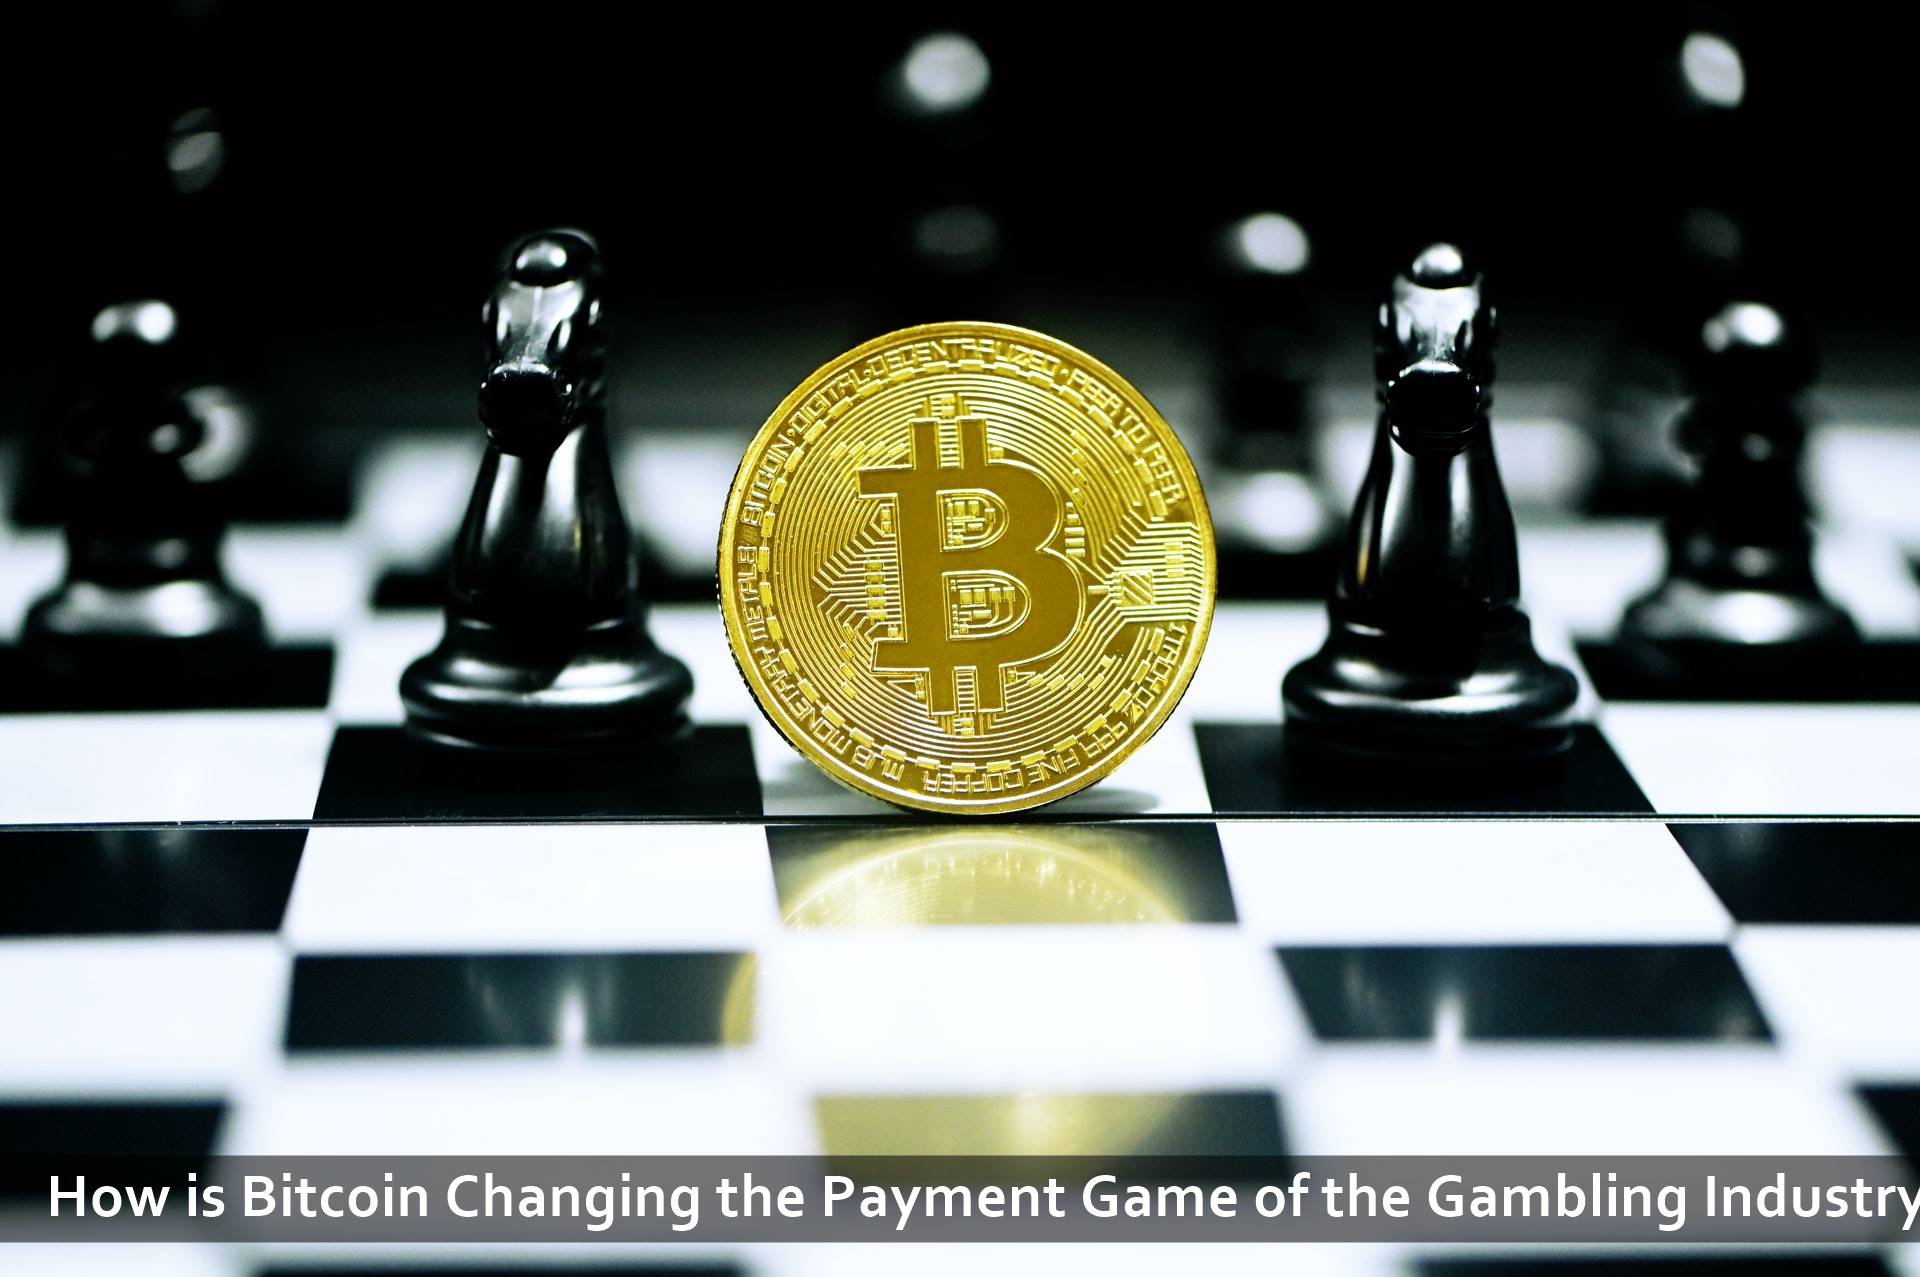 How is Bitcoin Changing the Payment Game of the Gambling Industry